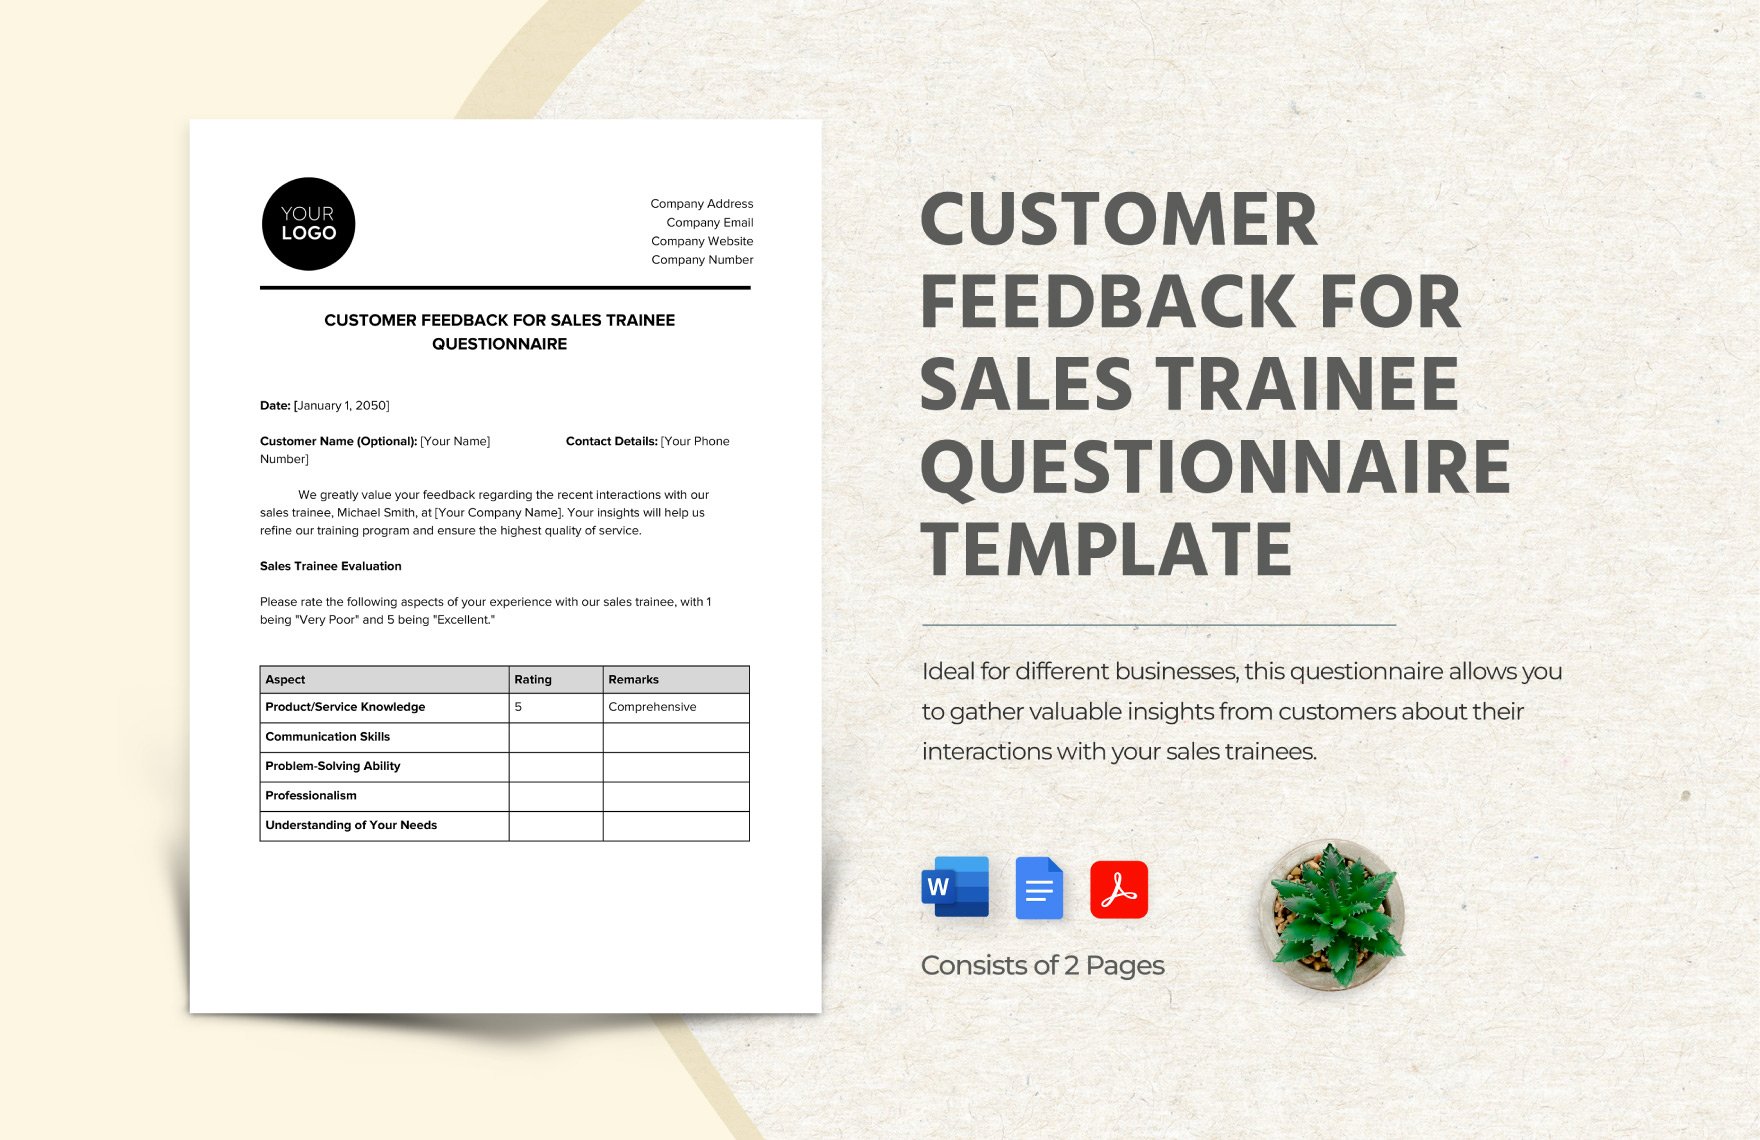 Customer Feedback for Sales Trainee Questionnaire Template in Word, Google Docs, PDF